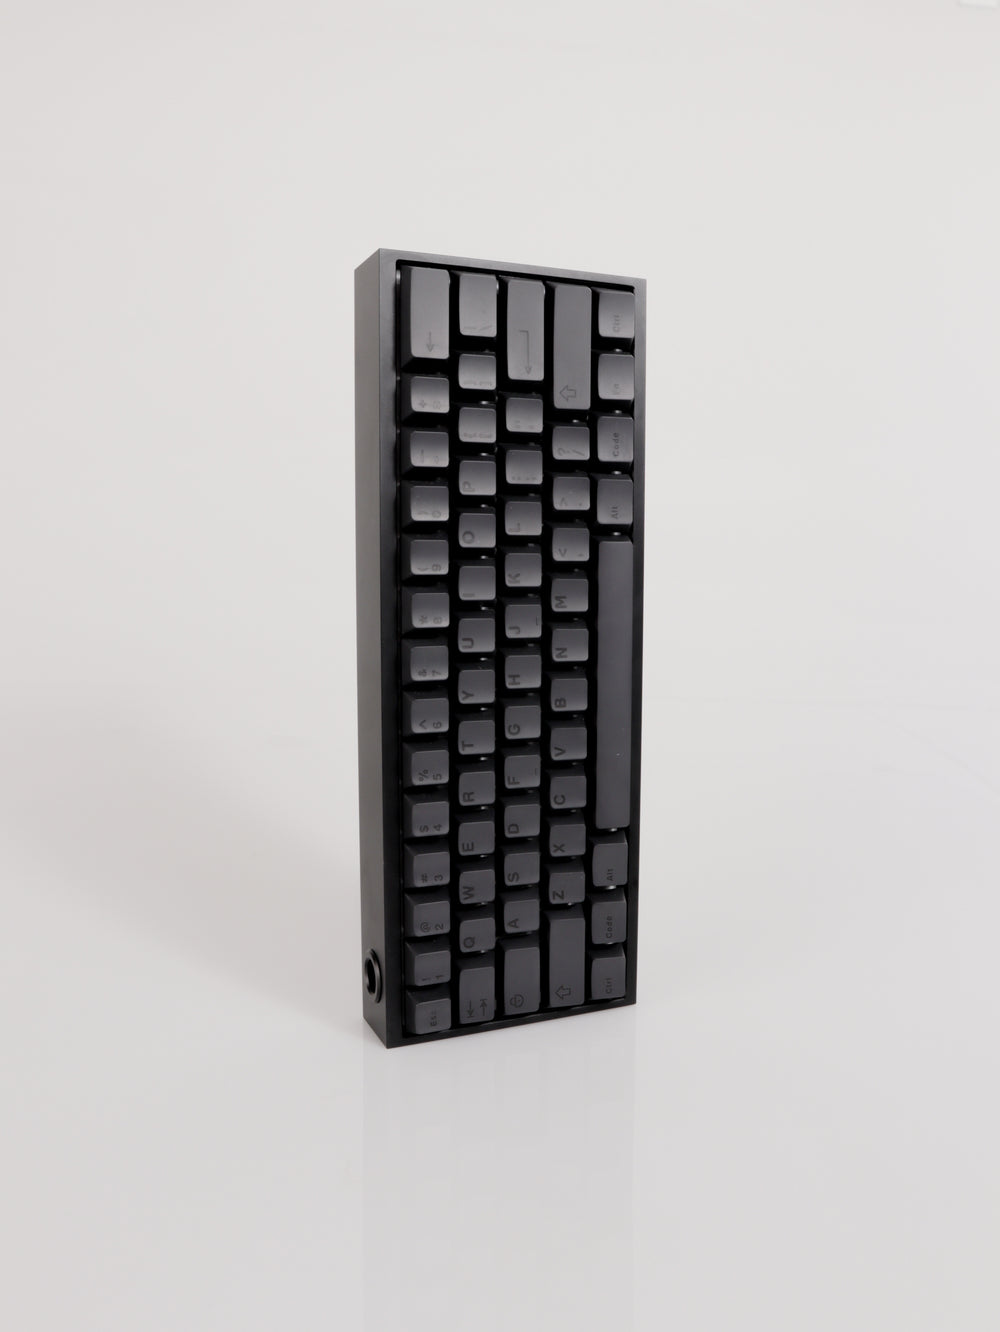 60HE Ascend Edition - Ascend Keyboards